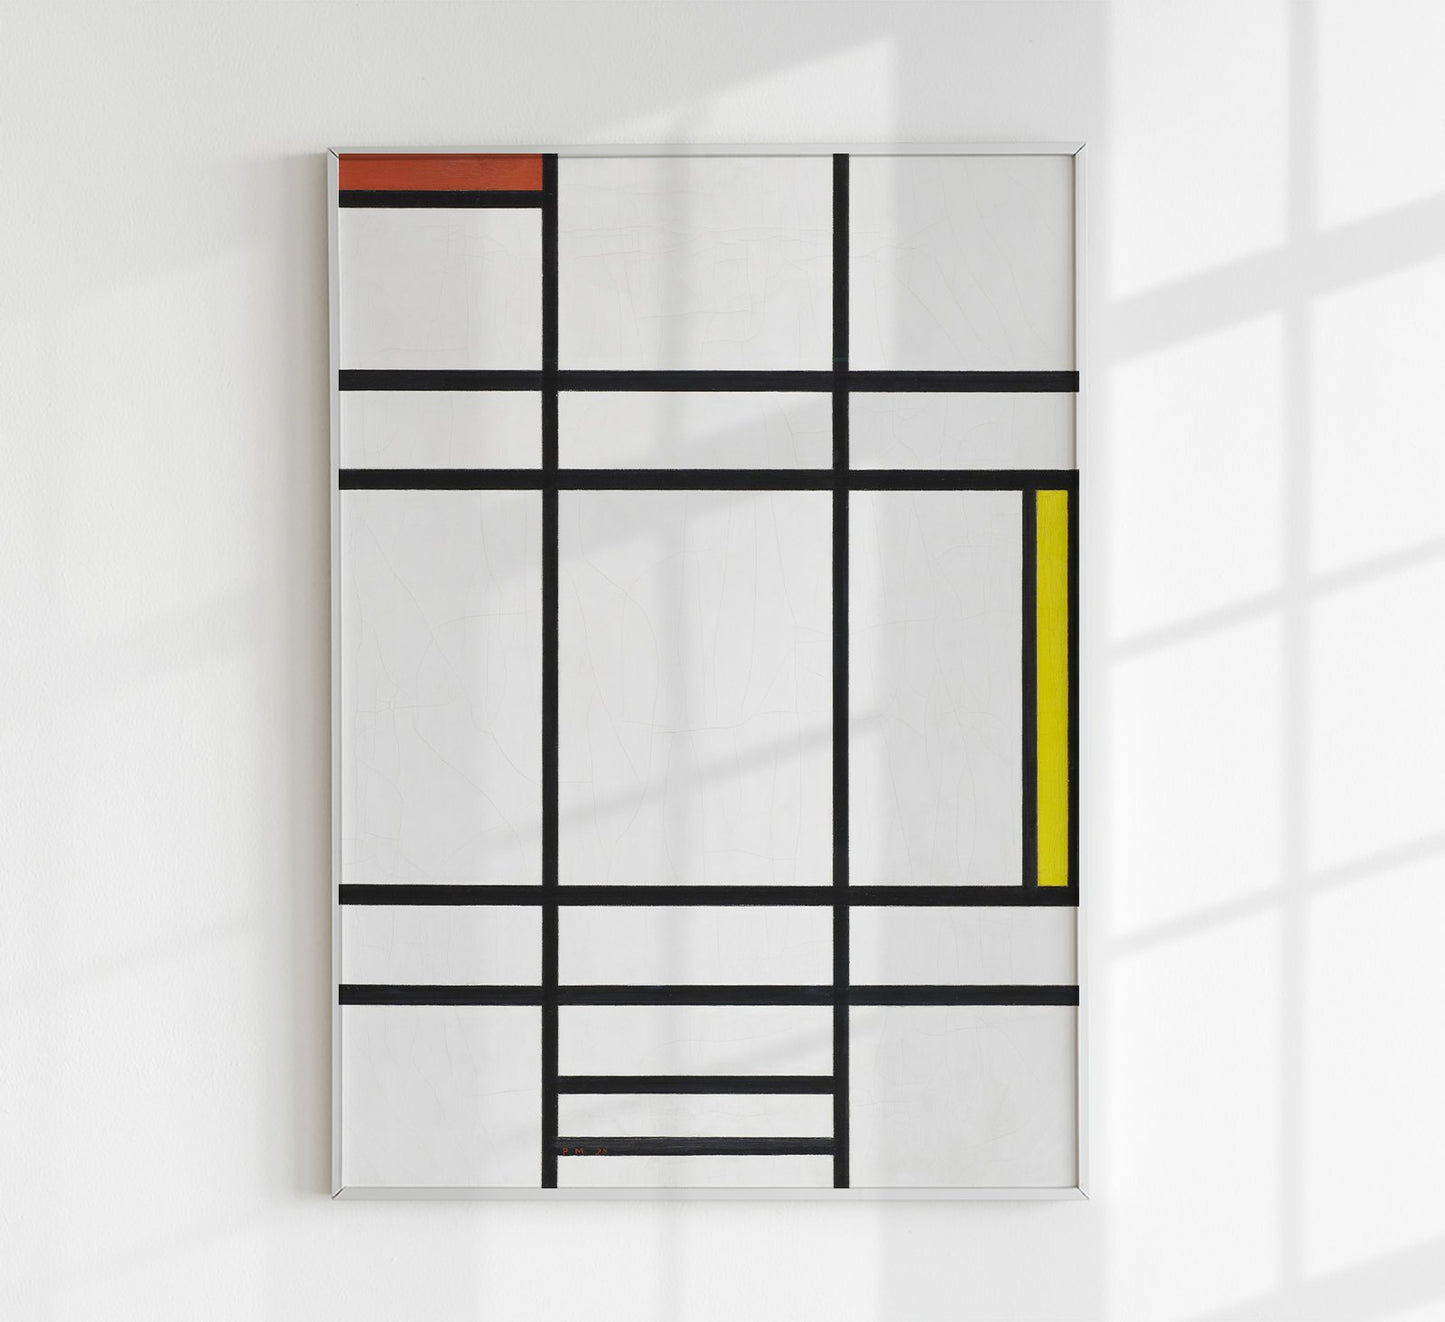 Composition in White, Red, and Yellow By Piet Mondrian